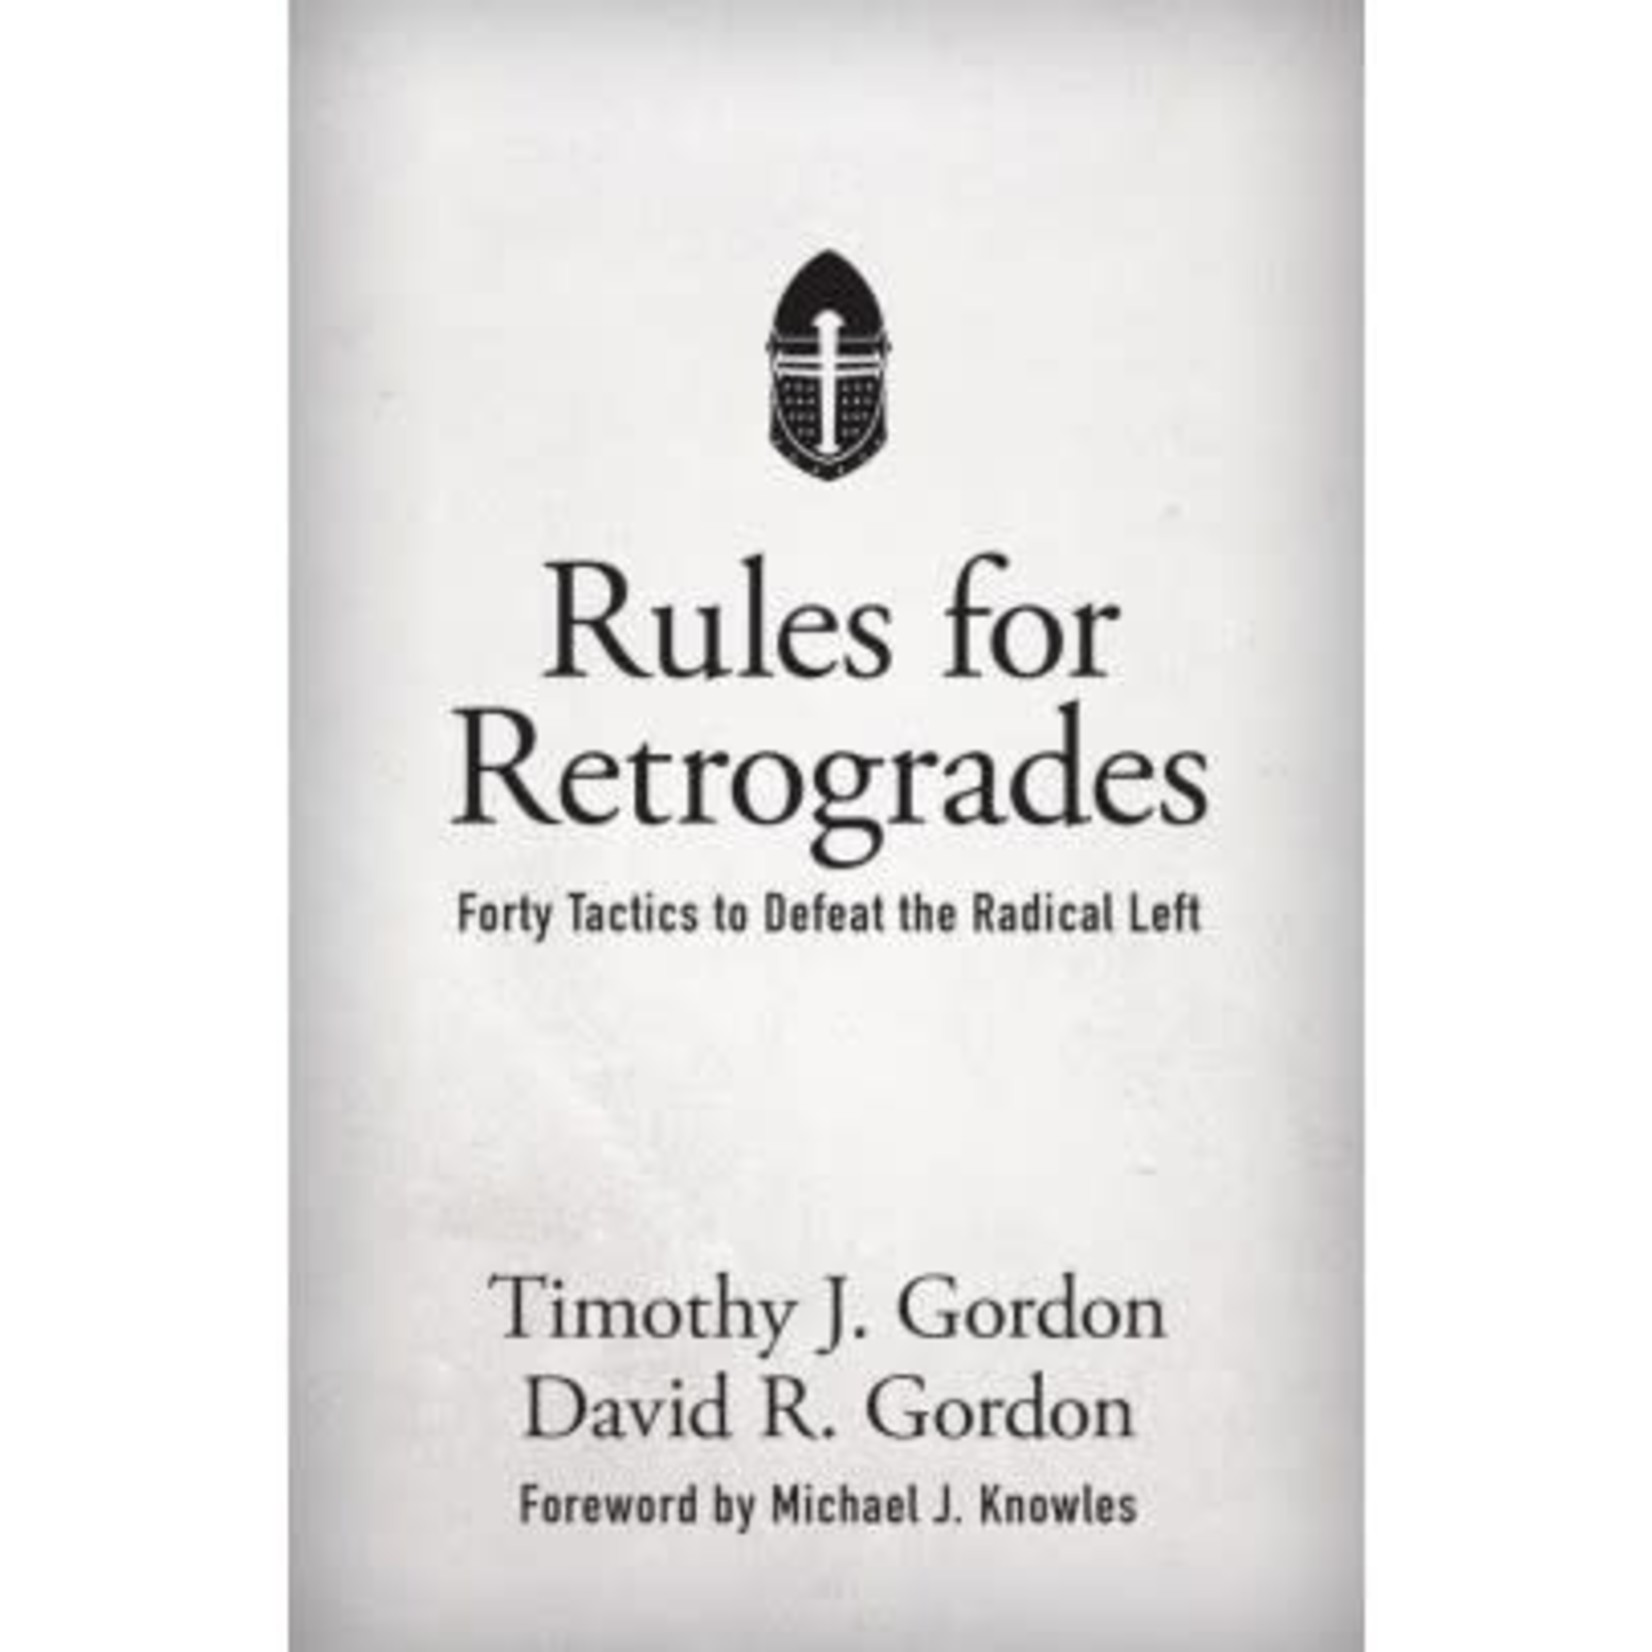 Rules for Retrogrades